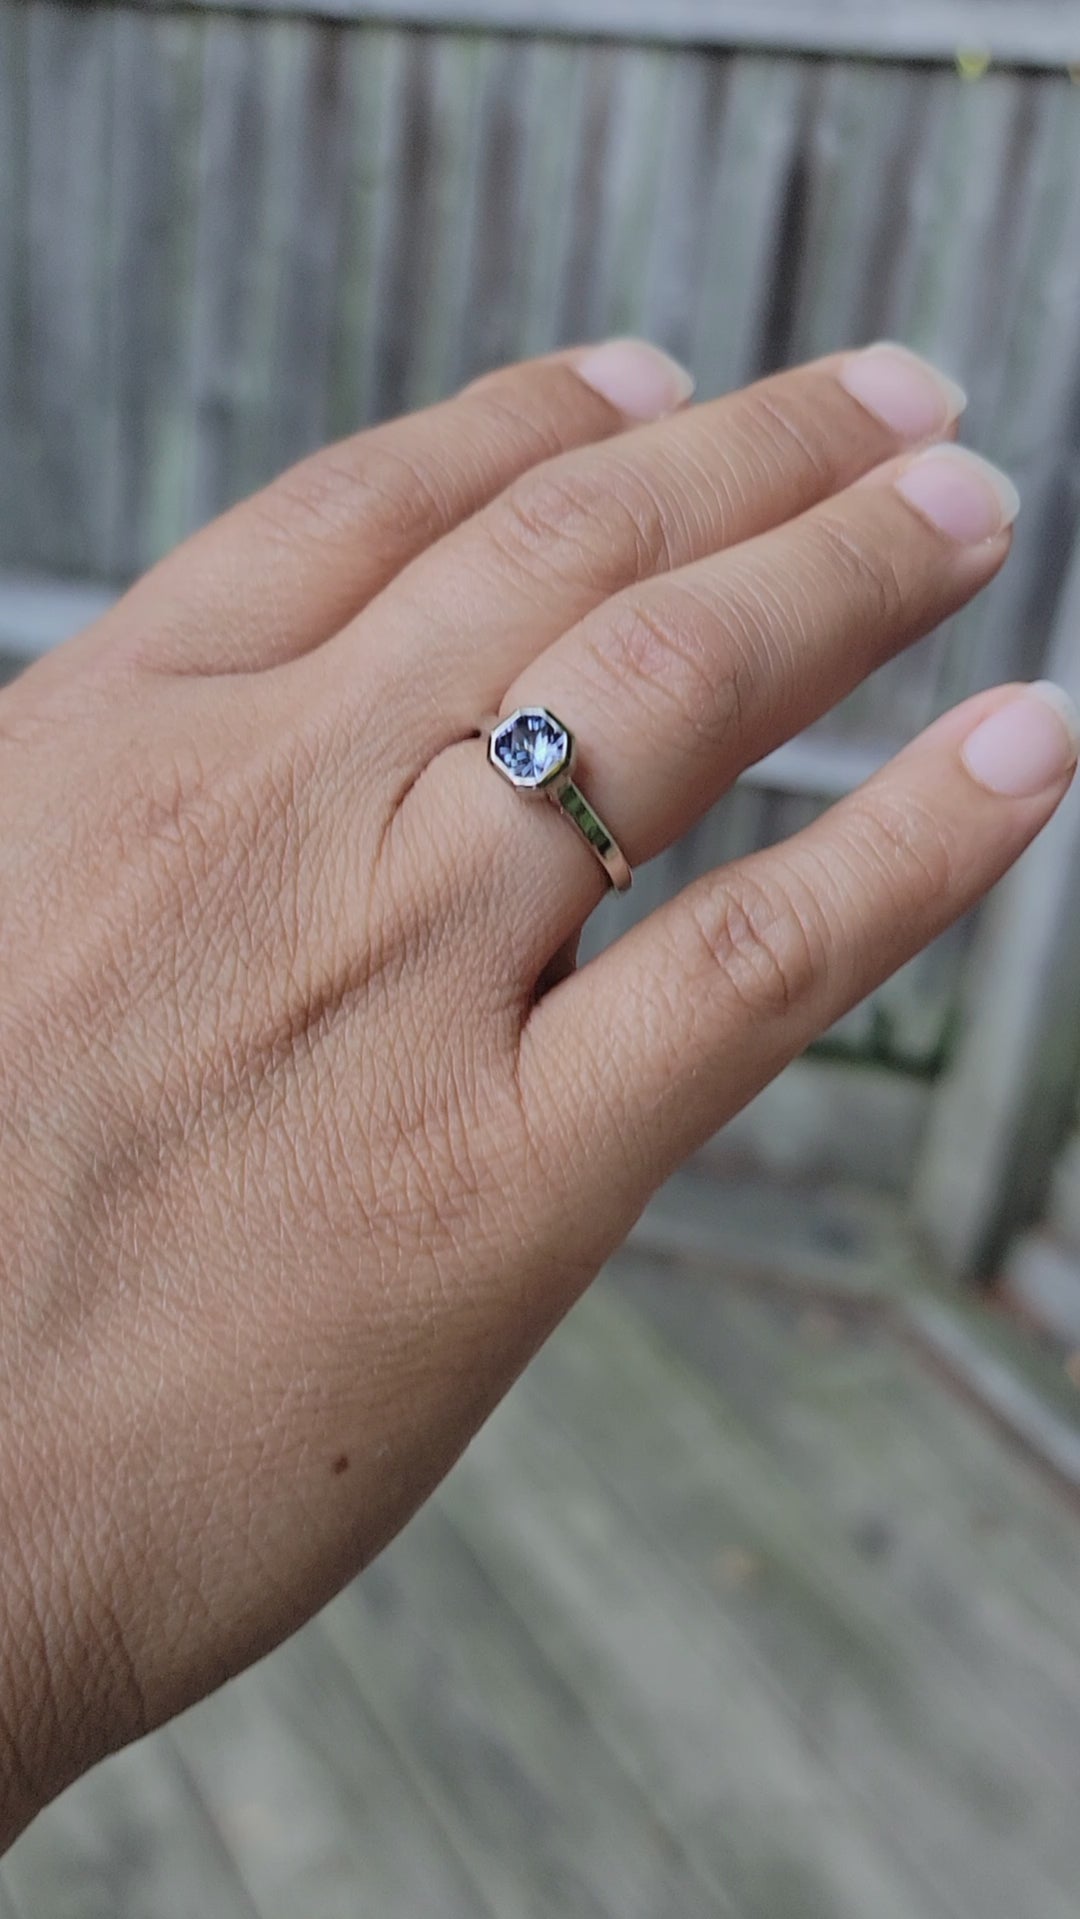 Peekaboo Medium/Lightweight Ring Setting - Depicted with Periwinkle Umba Sapphire (Setting Only, Center Stone Sold Separately)